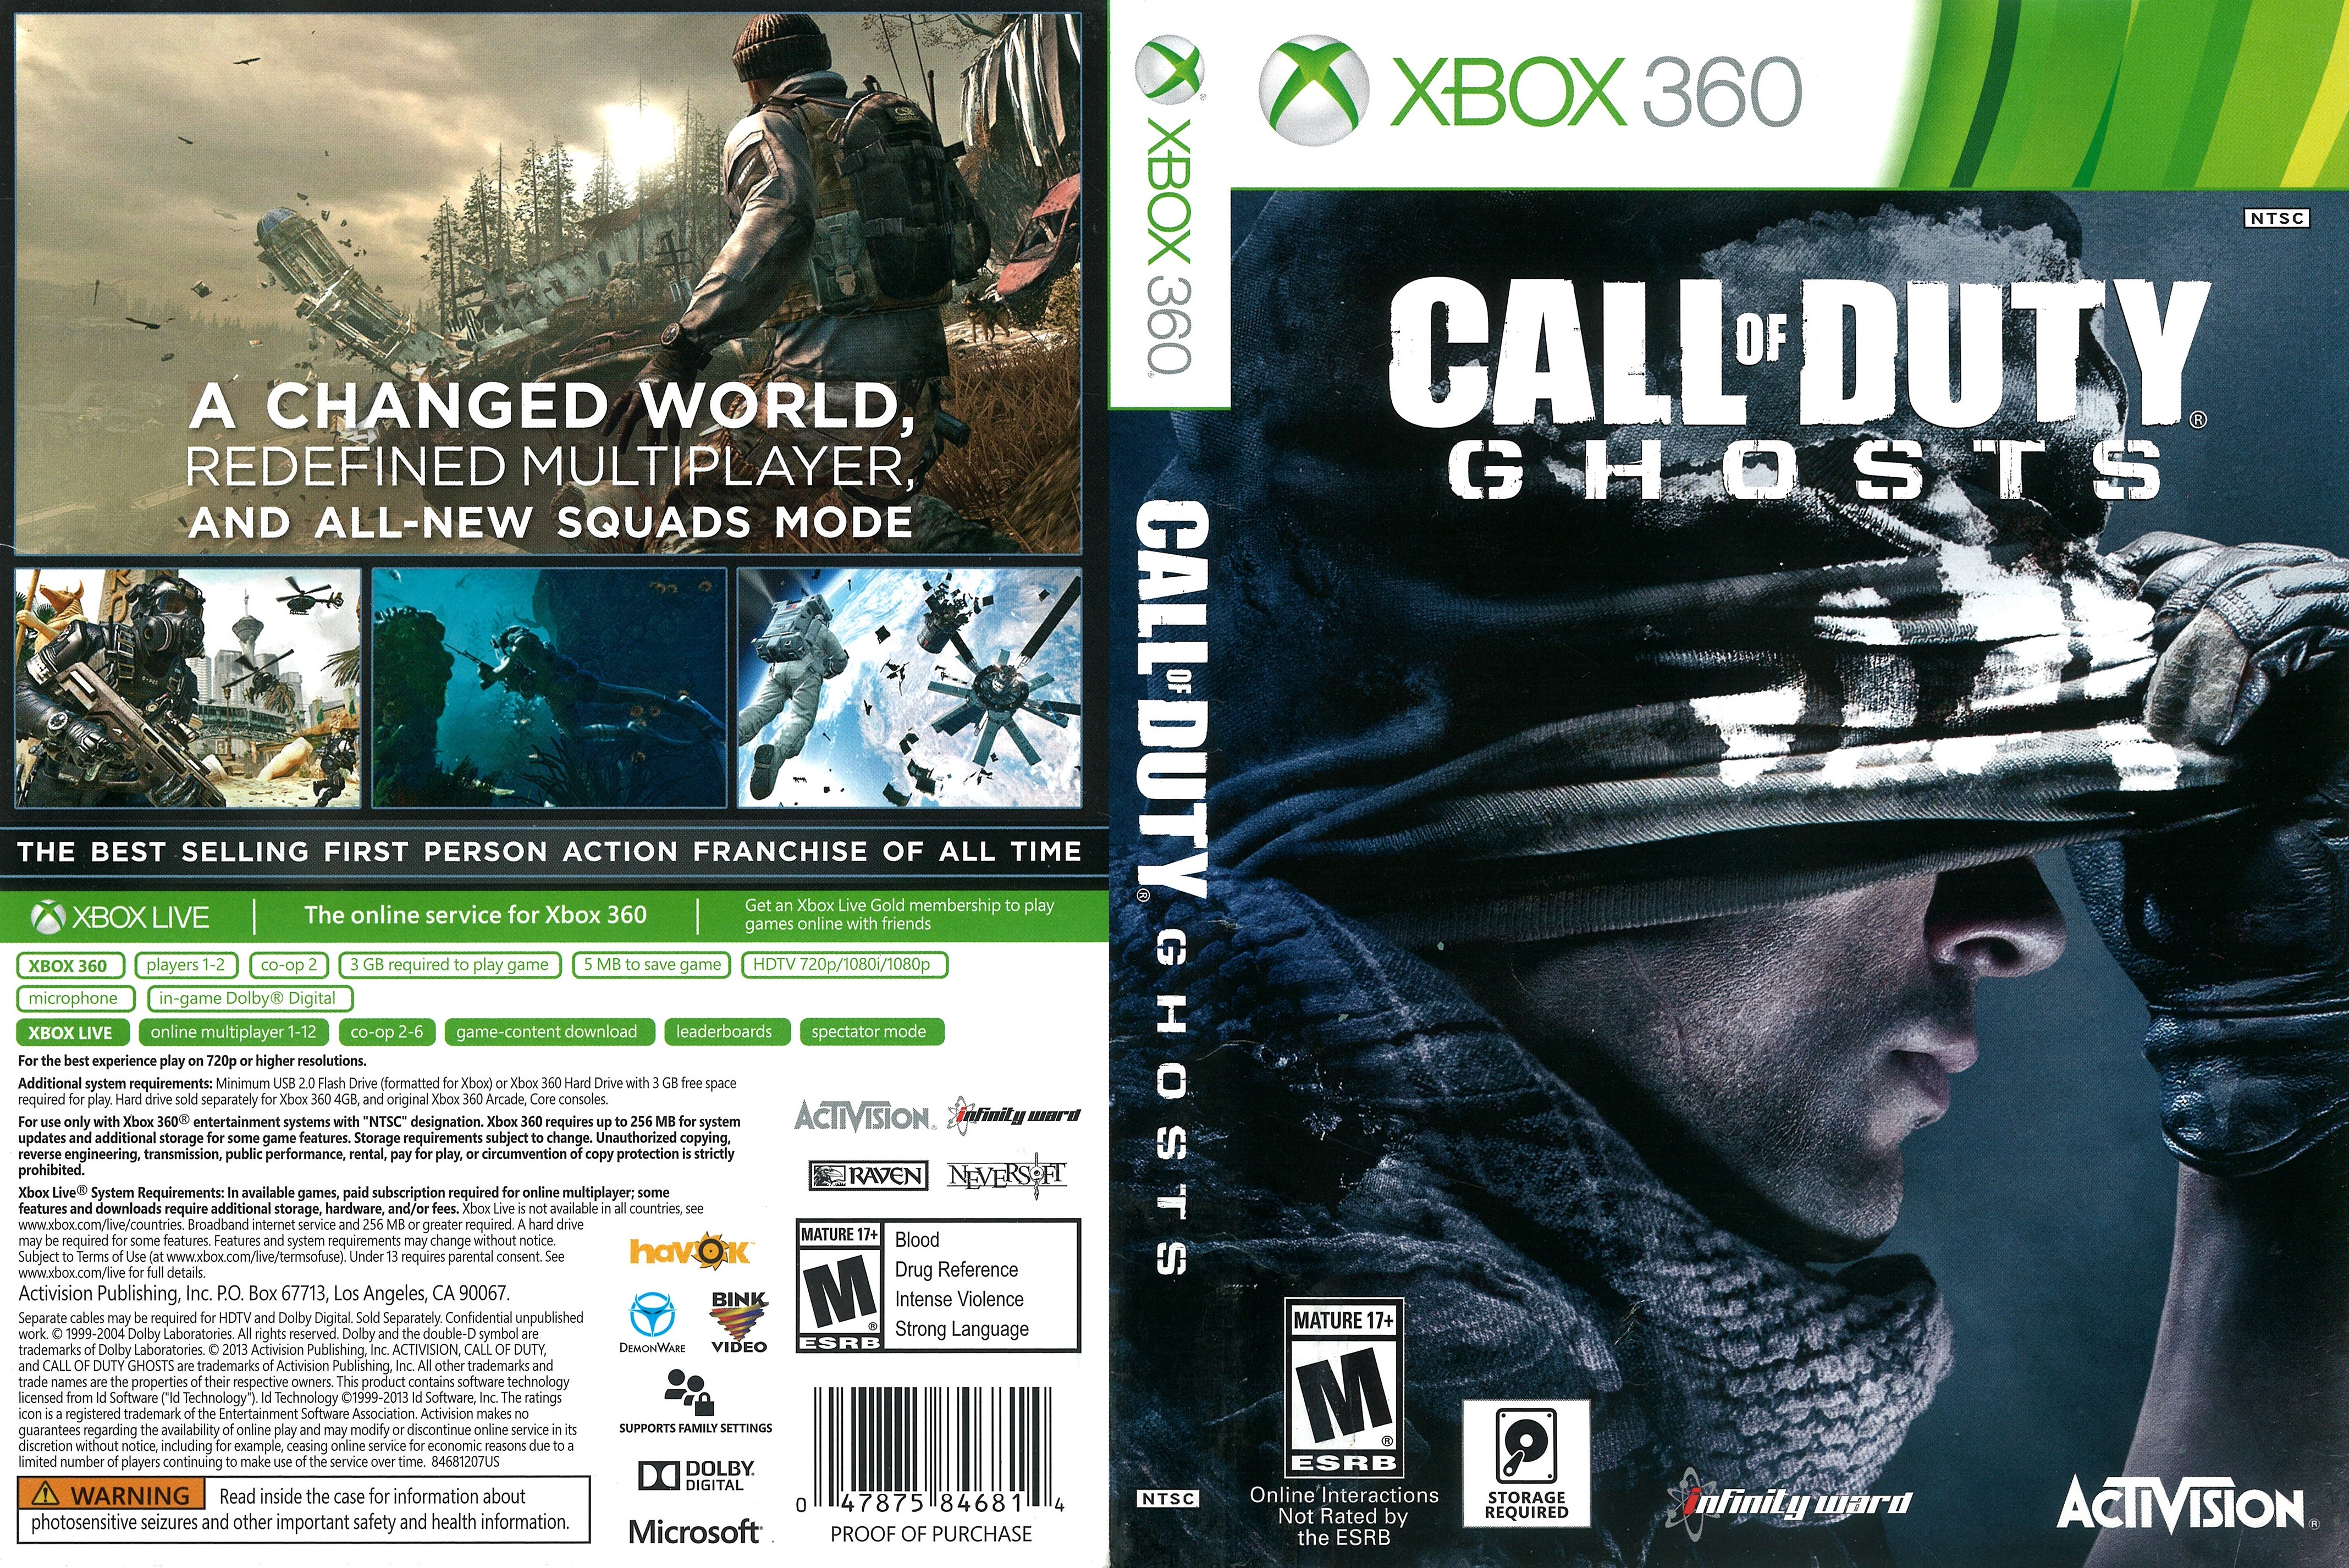 Call of duty xbox game. Call of Duty Ghosts Xbox 360 обложка. Call of Duty 3 Xbox 360 диск. Call of Duty диск на иксбокс 360. Call of Duty диск на Xbox 360.